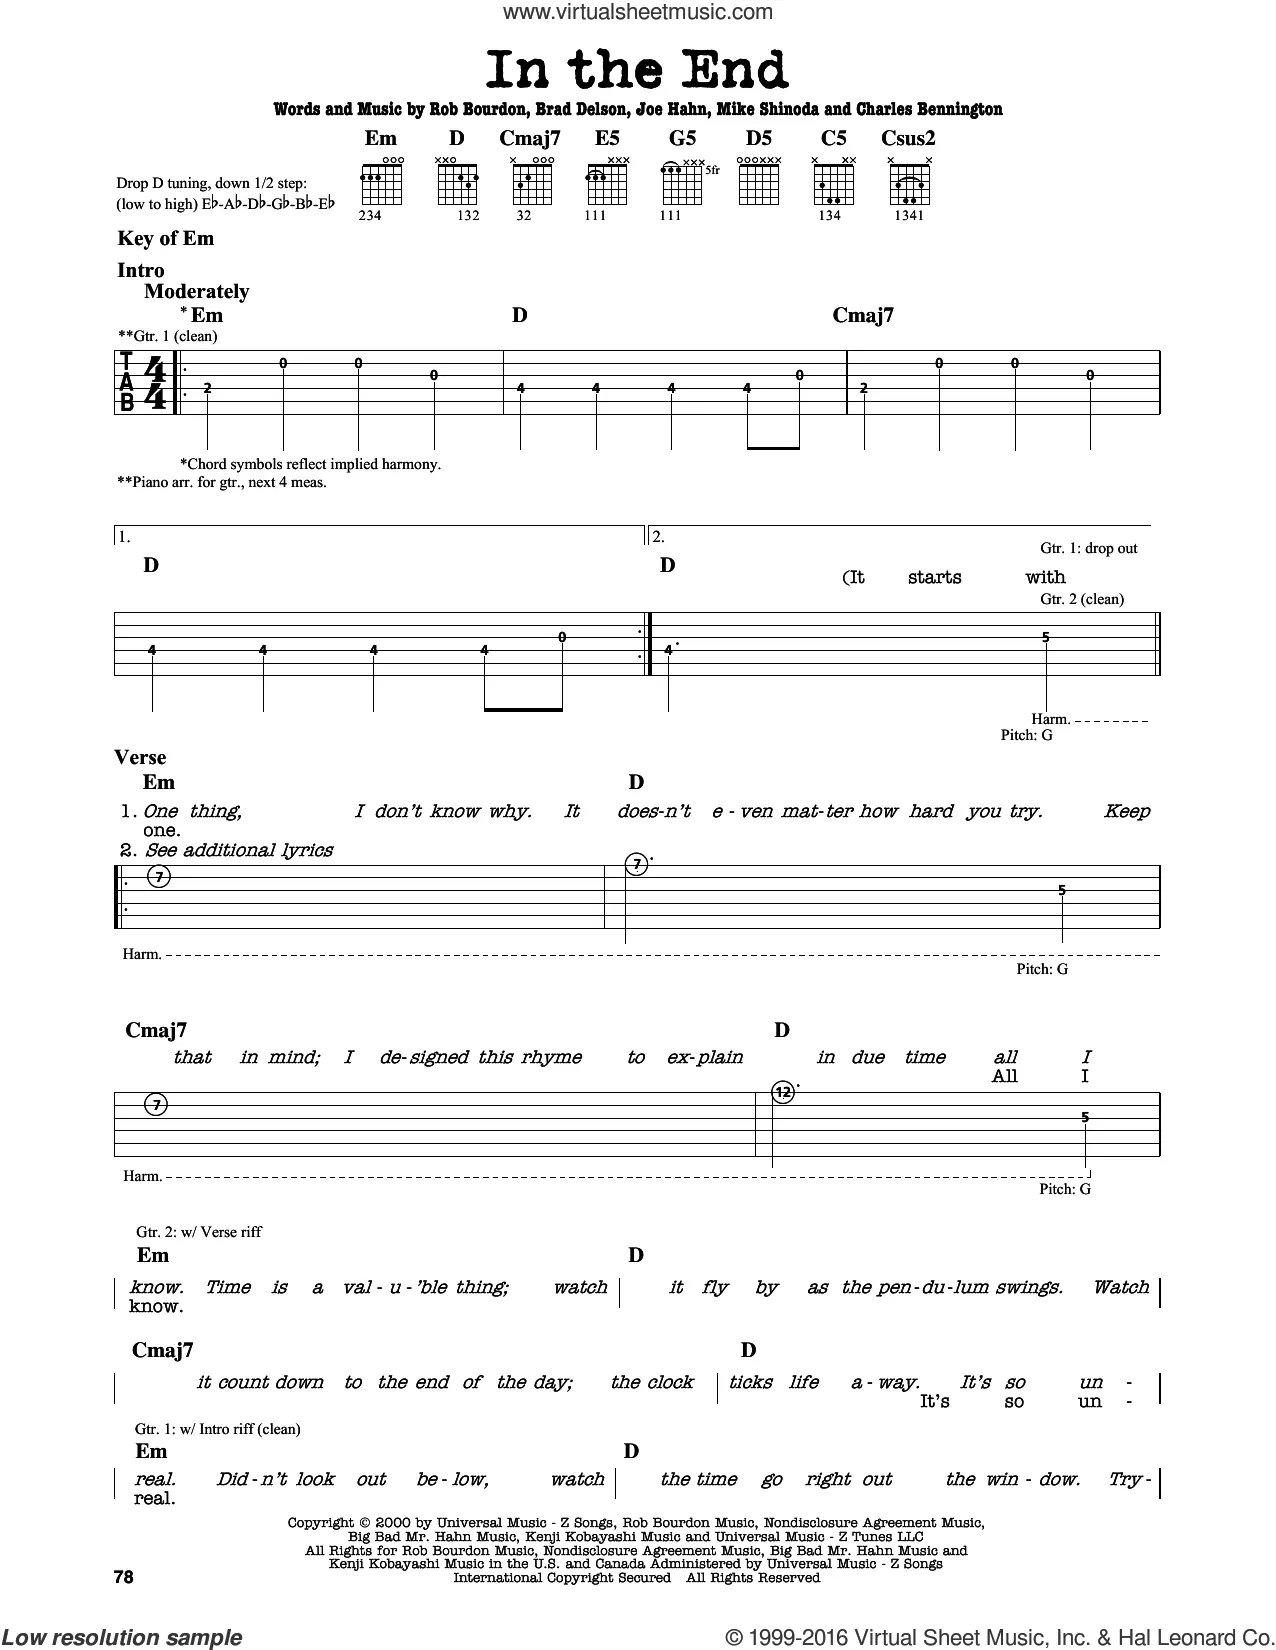 Linkin Park Sheet Music to download and print